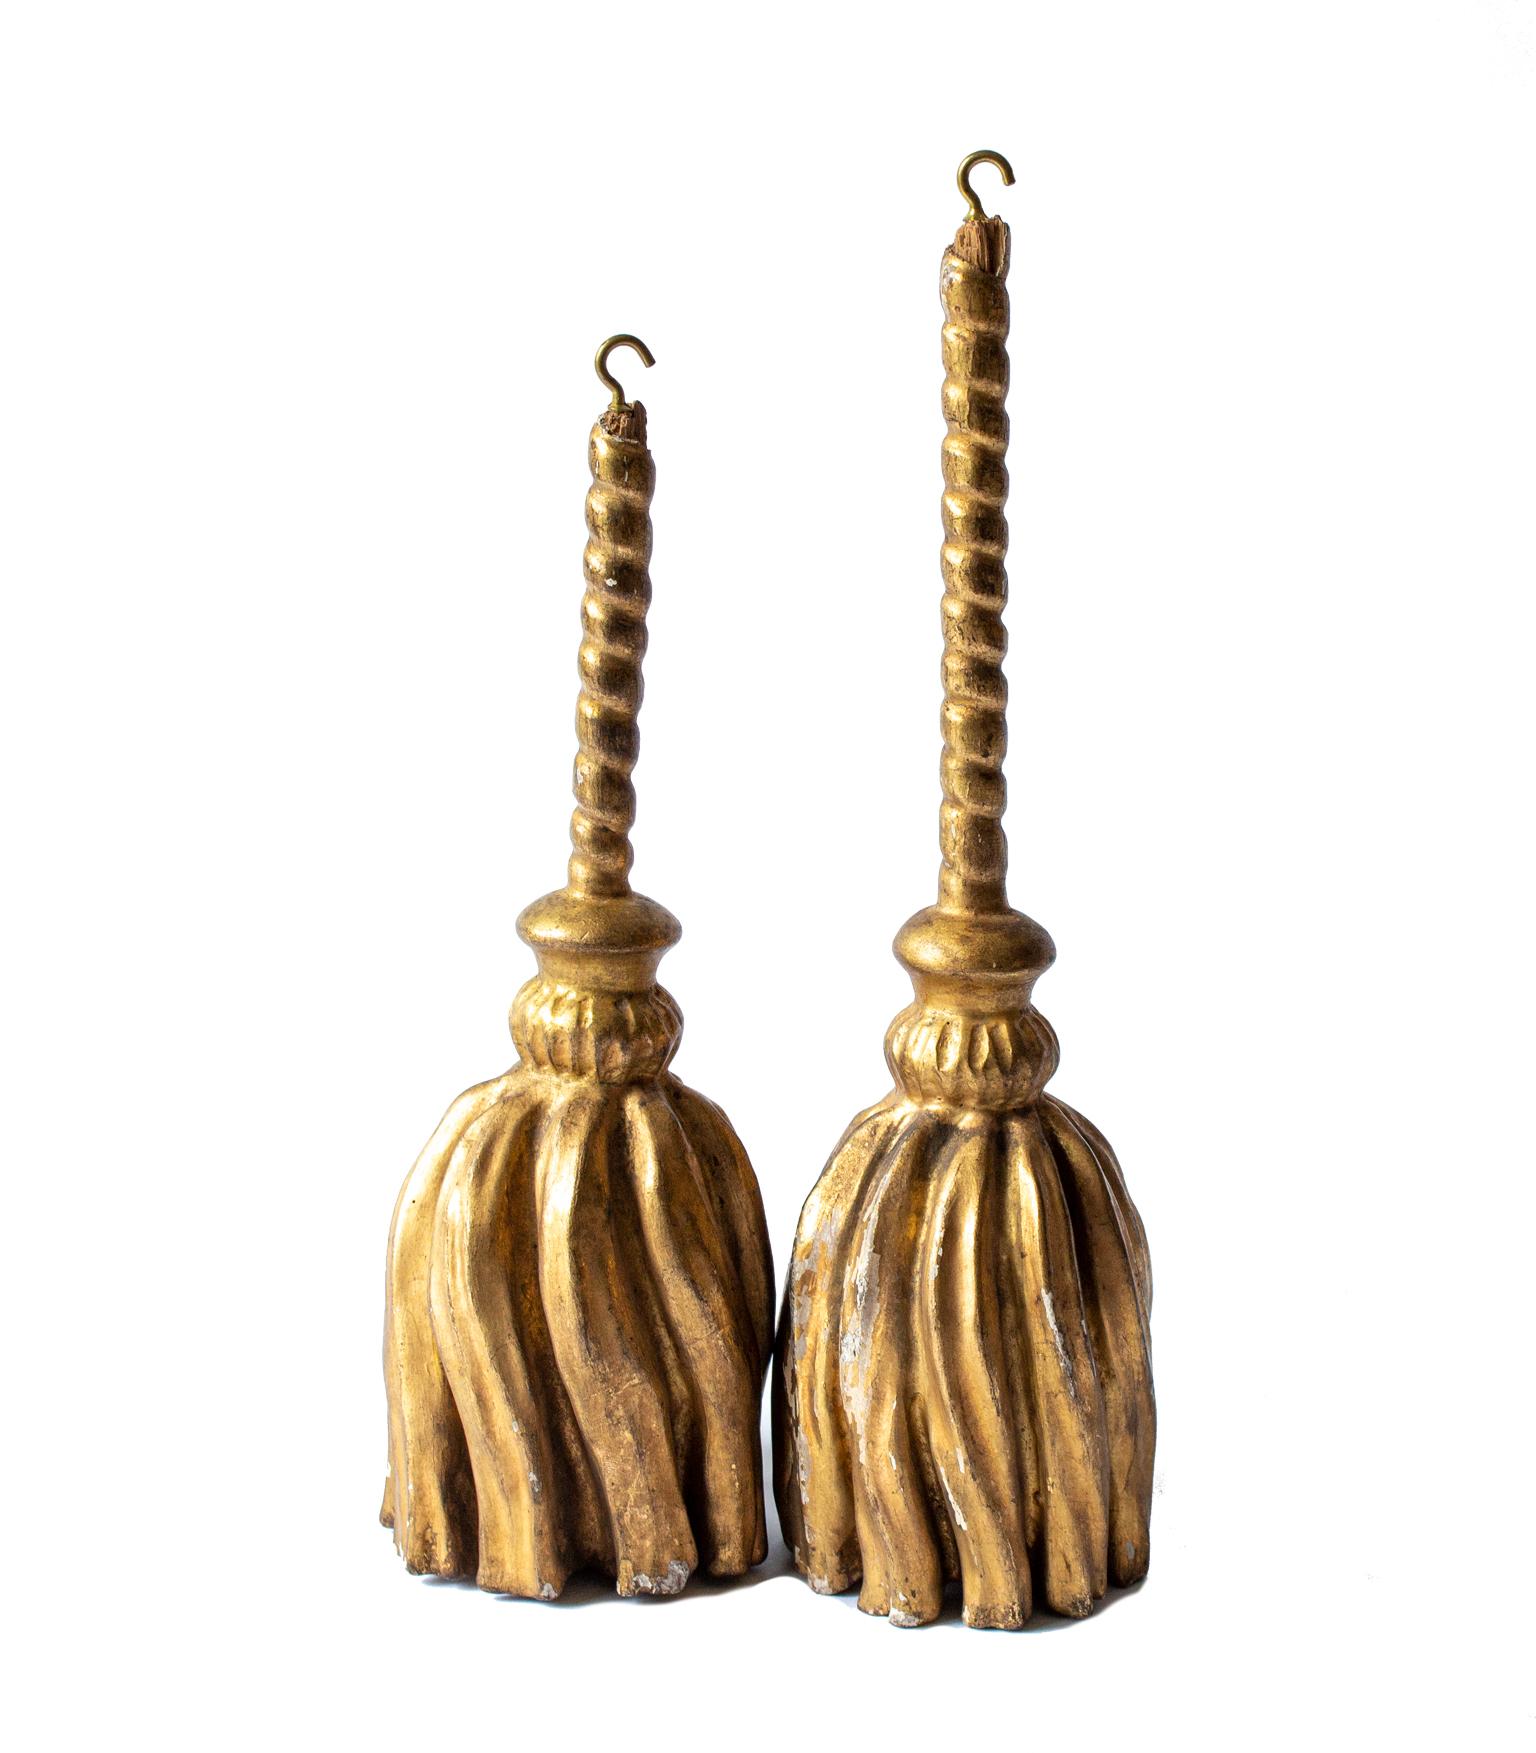 Pair of Gustavian 17th century carved antique Swedish Gustavian gilt tassels. The tassels are hand carved and thus different, but similar. Originally utilized not only as drapery accents but, also furniture decor, too. These were often used from the